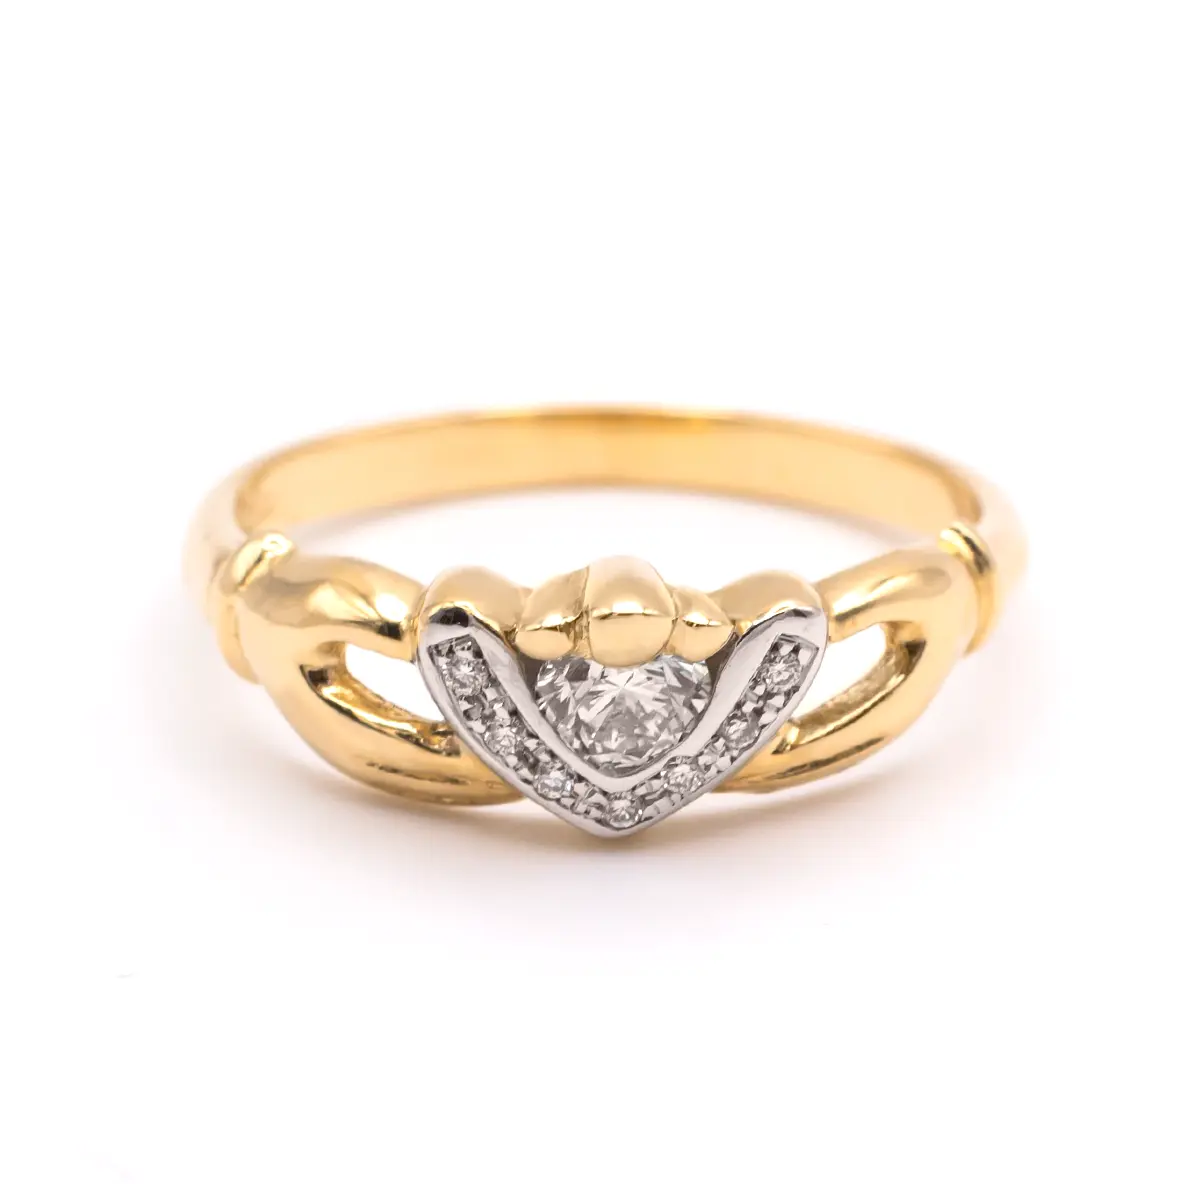 Ladies 14k Gold Claddagh Ring with Diamonds...